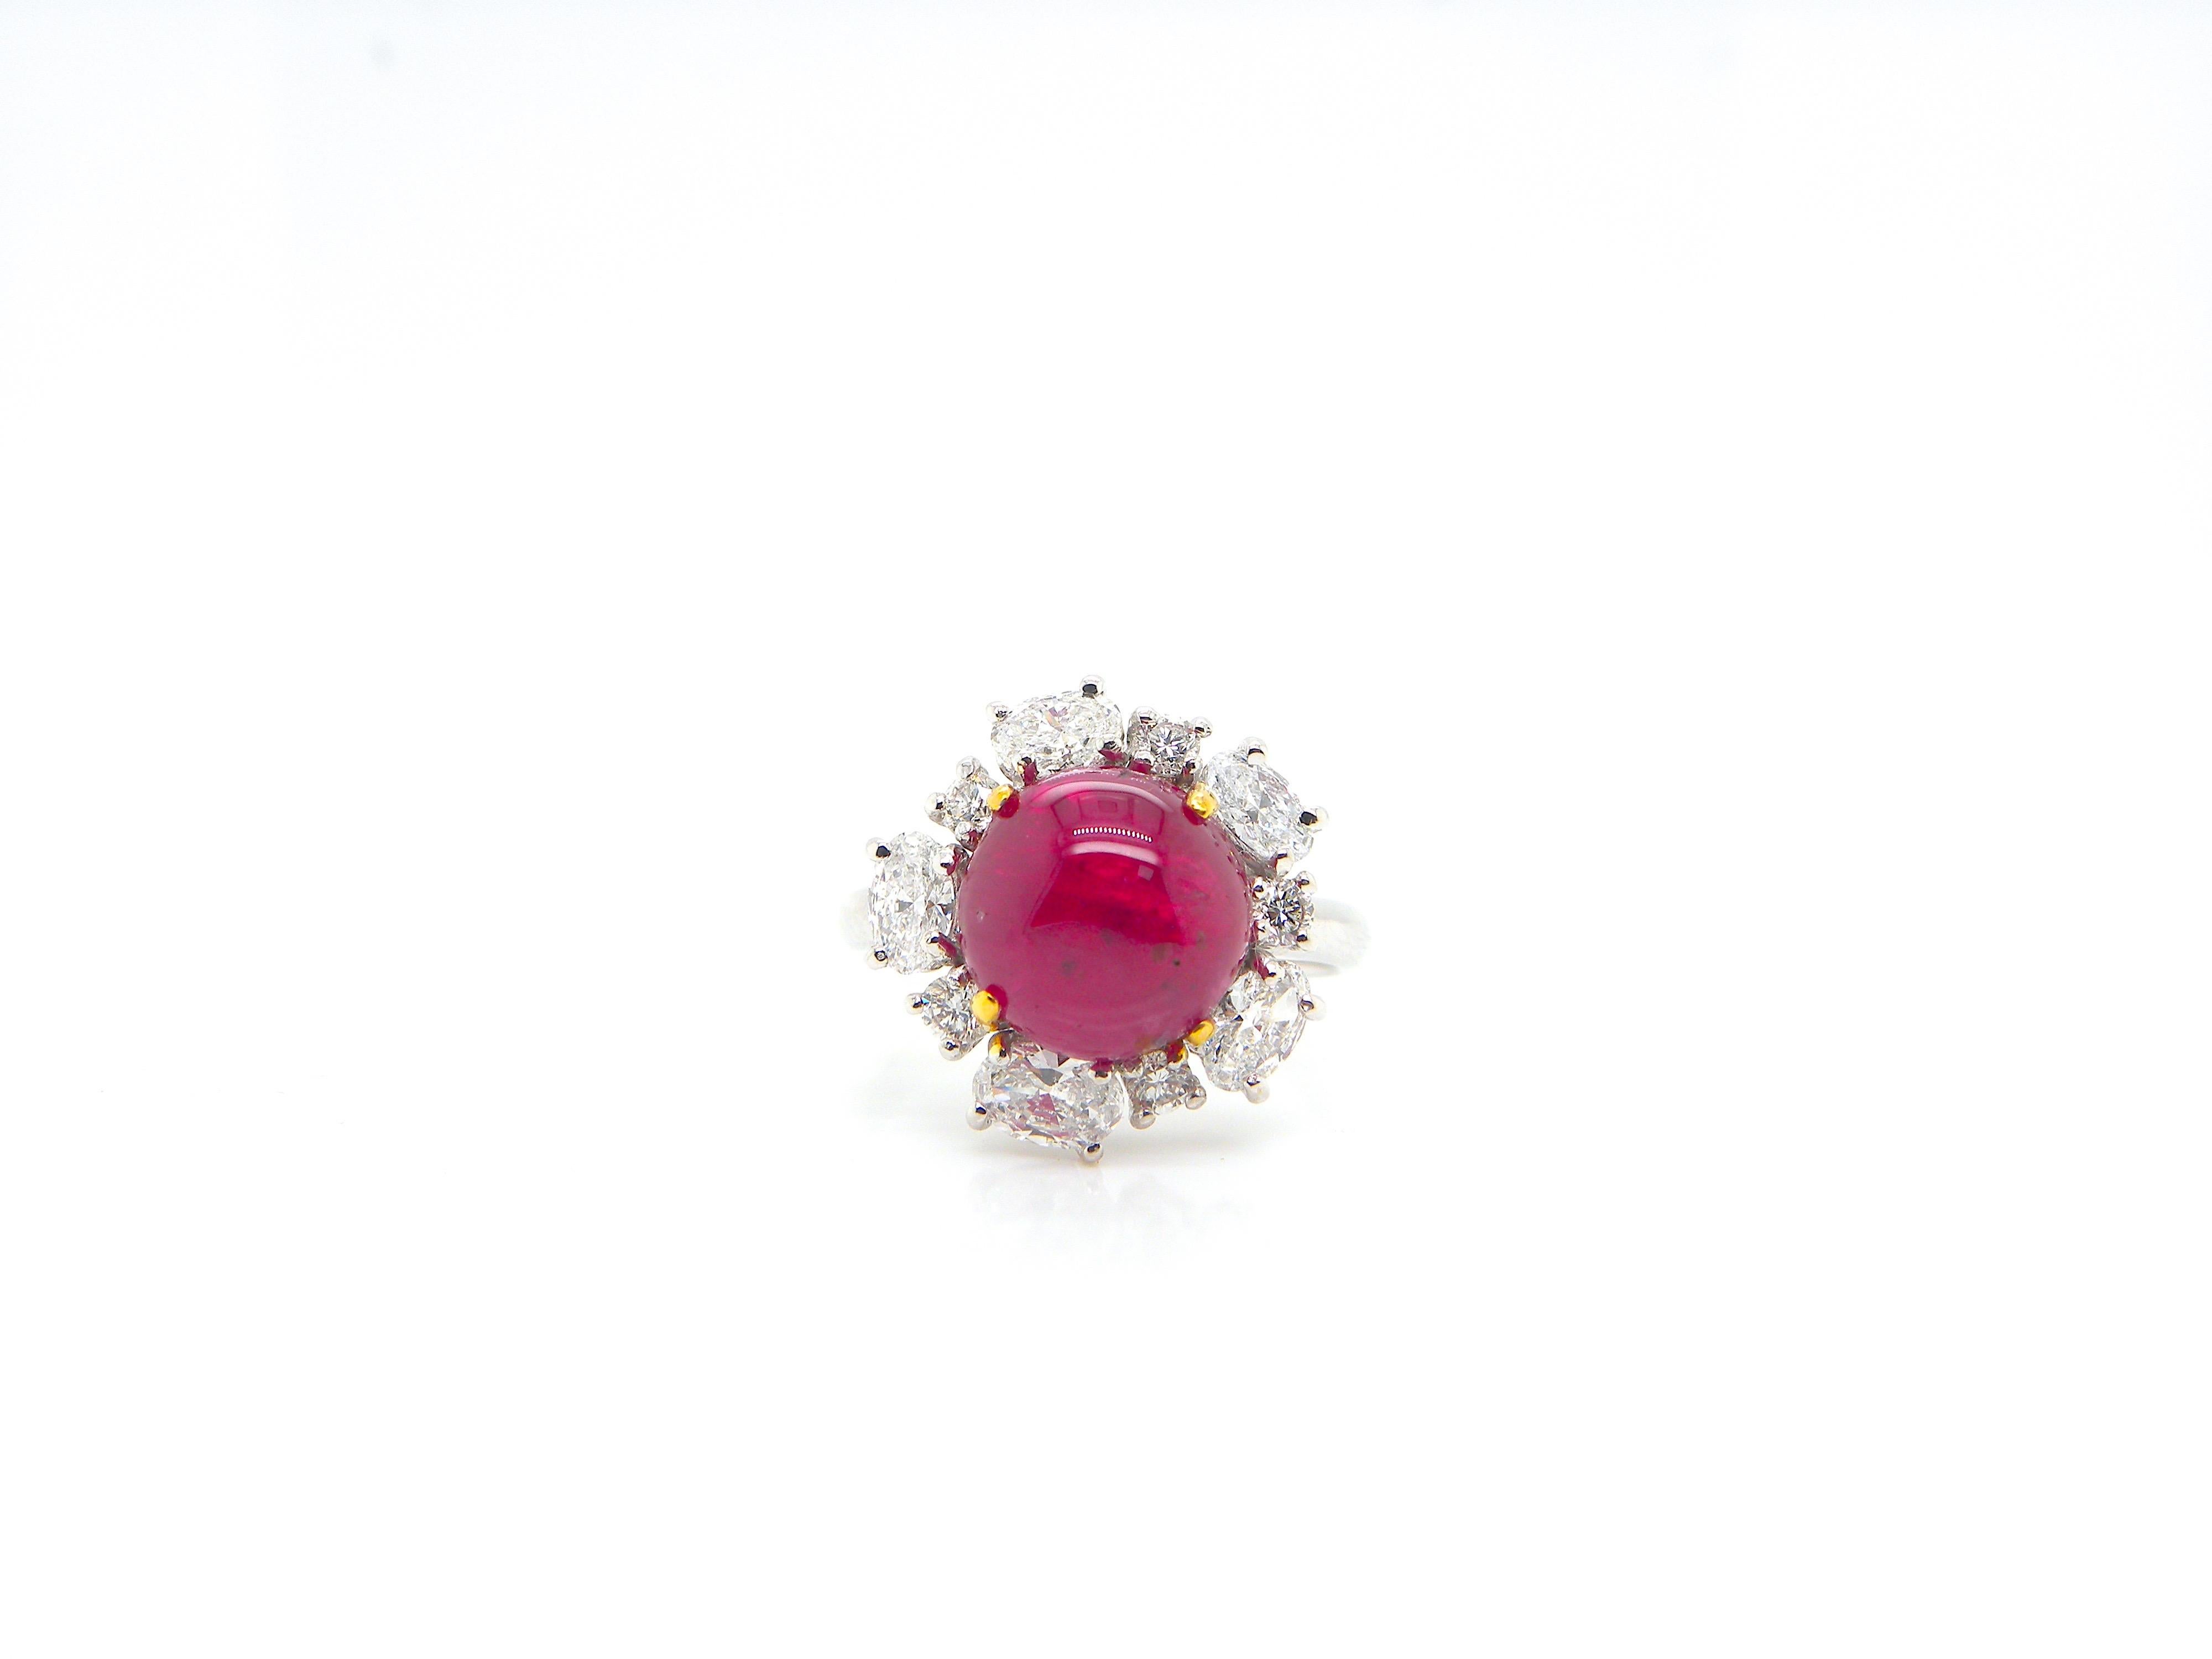 5.66 Carat GIA Certified Burma No Heat Vivid Red Ruby Cabochon and Diamond Ring:

A rare jewel, it features a 5.66 carat GIA certified Burmese unheated ruby cabochon surrounded by multitude of white oval-shaped and round-shaped diamonds weighing